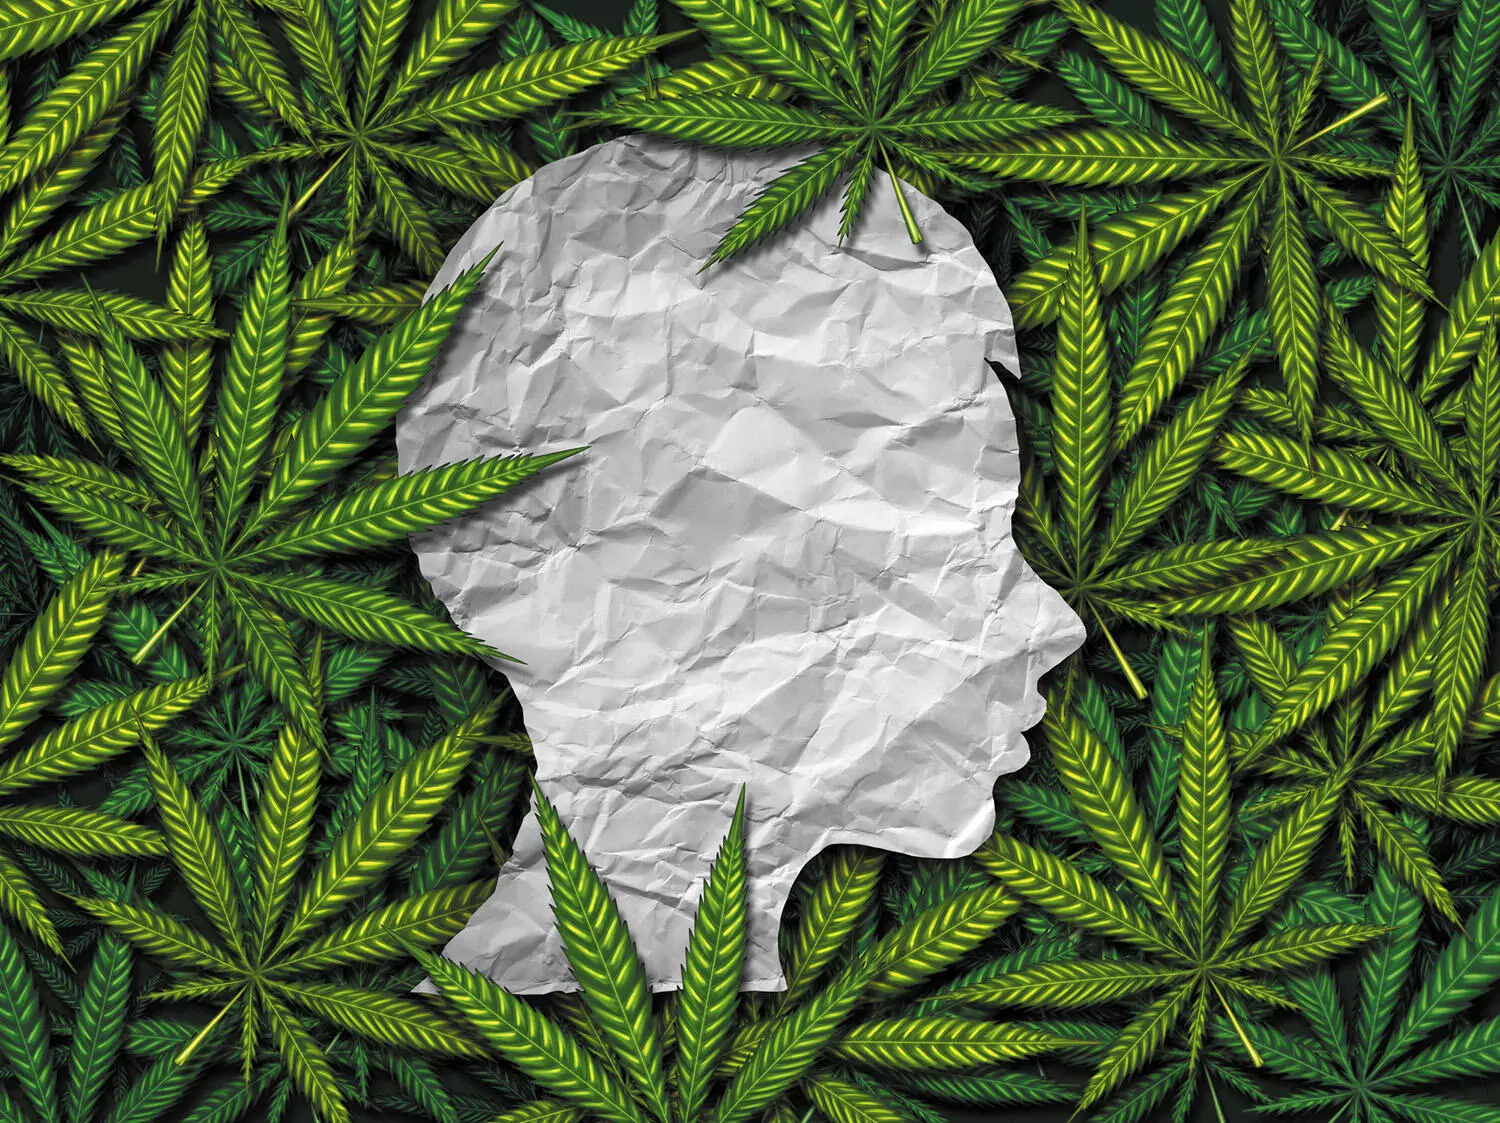 Cannabis Use among Youths Increases the risk of Self-Harm and Homicide